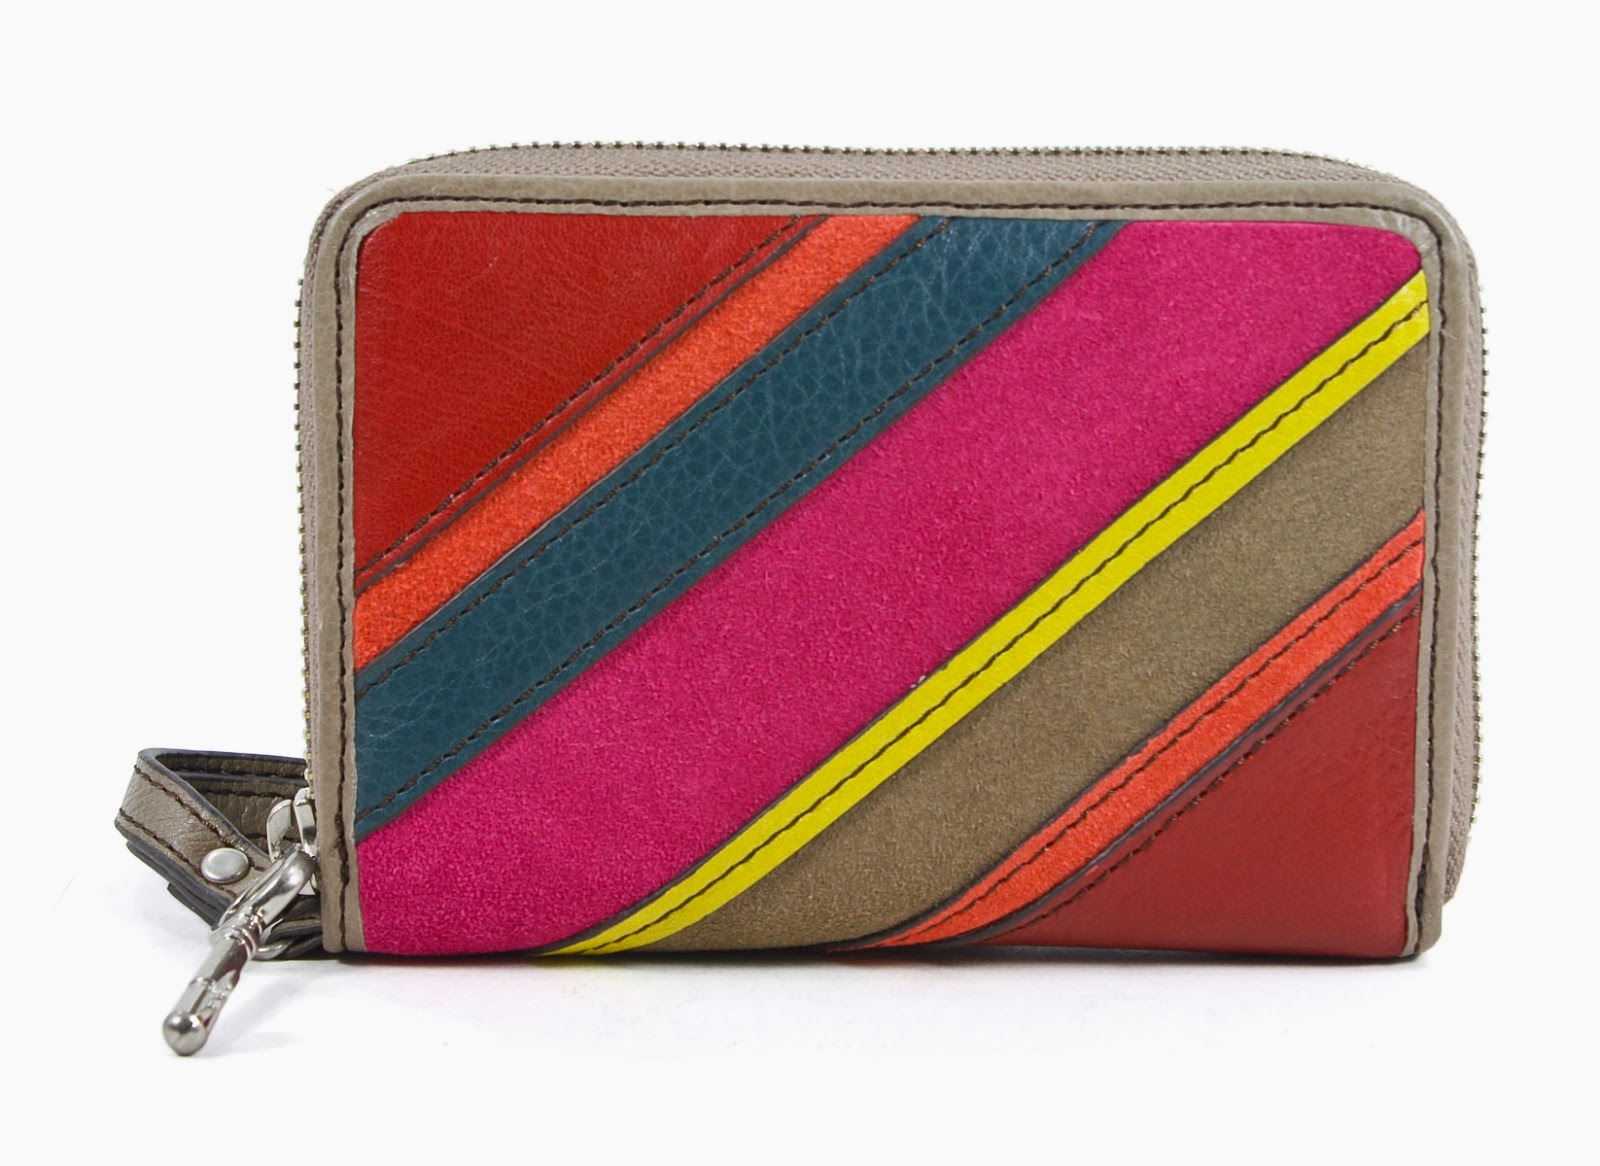 Boutique Malaysia: Fossil Multifunction Patchwork Striped wallet Wristlet